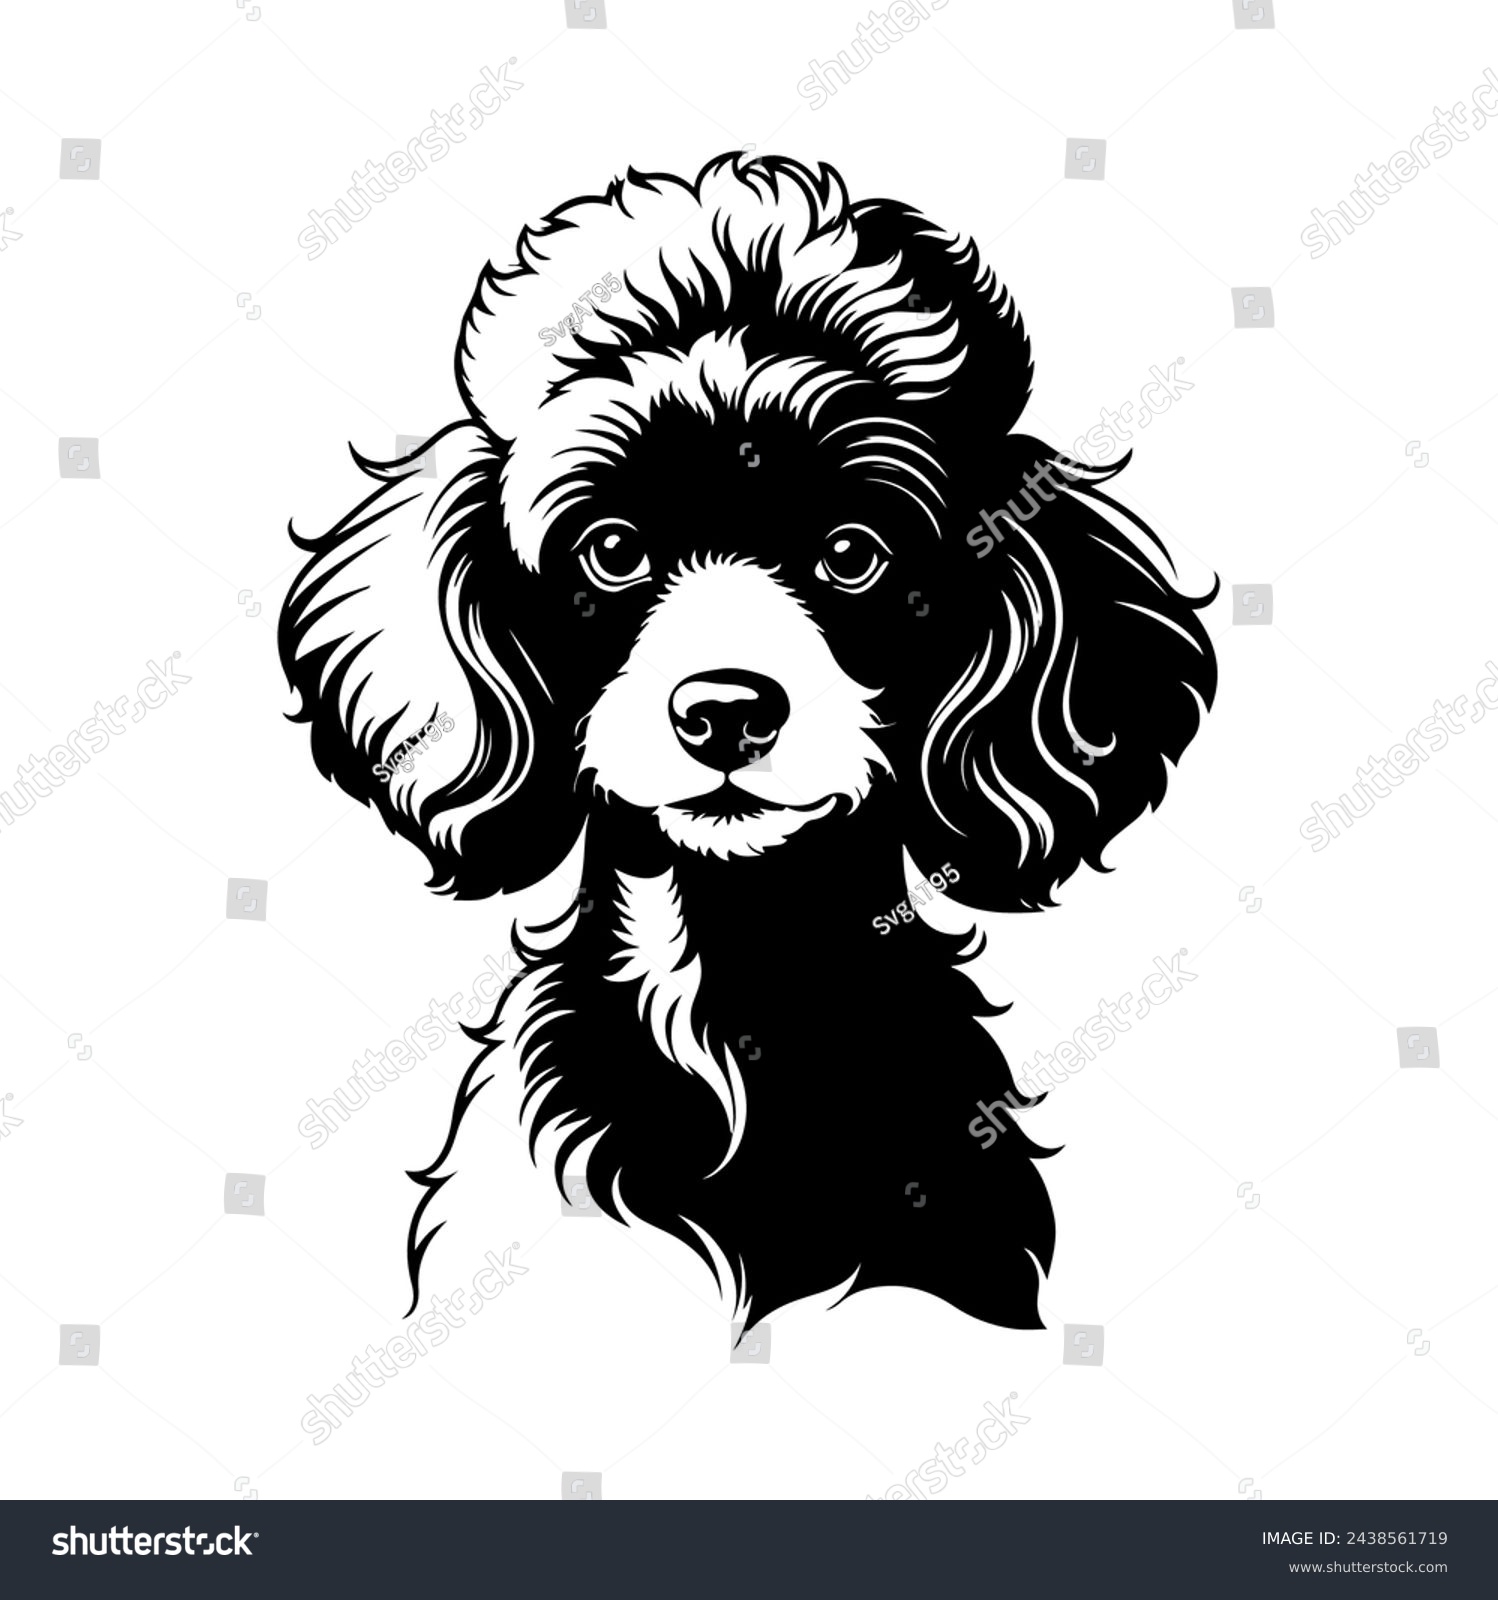 SVG of Portrait of a Poodle Dog Vector isolated on white background, Dog Silhouettes. svg